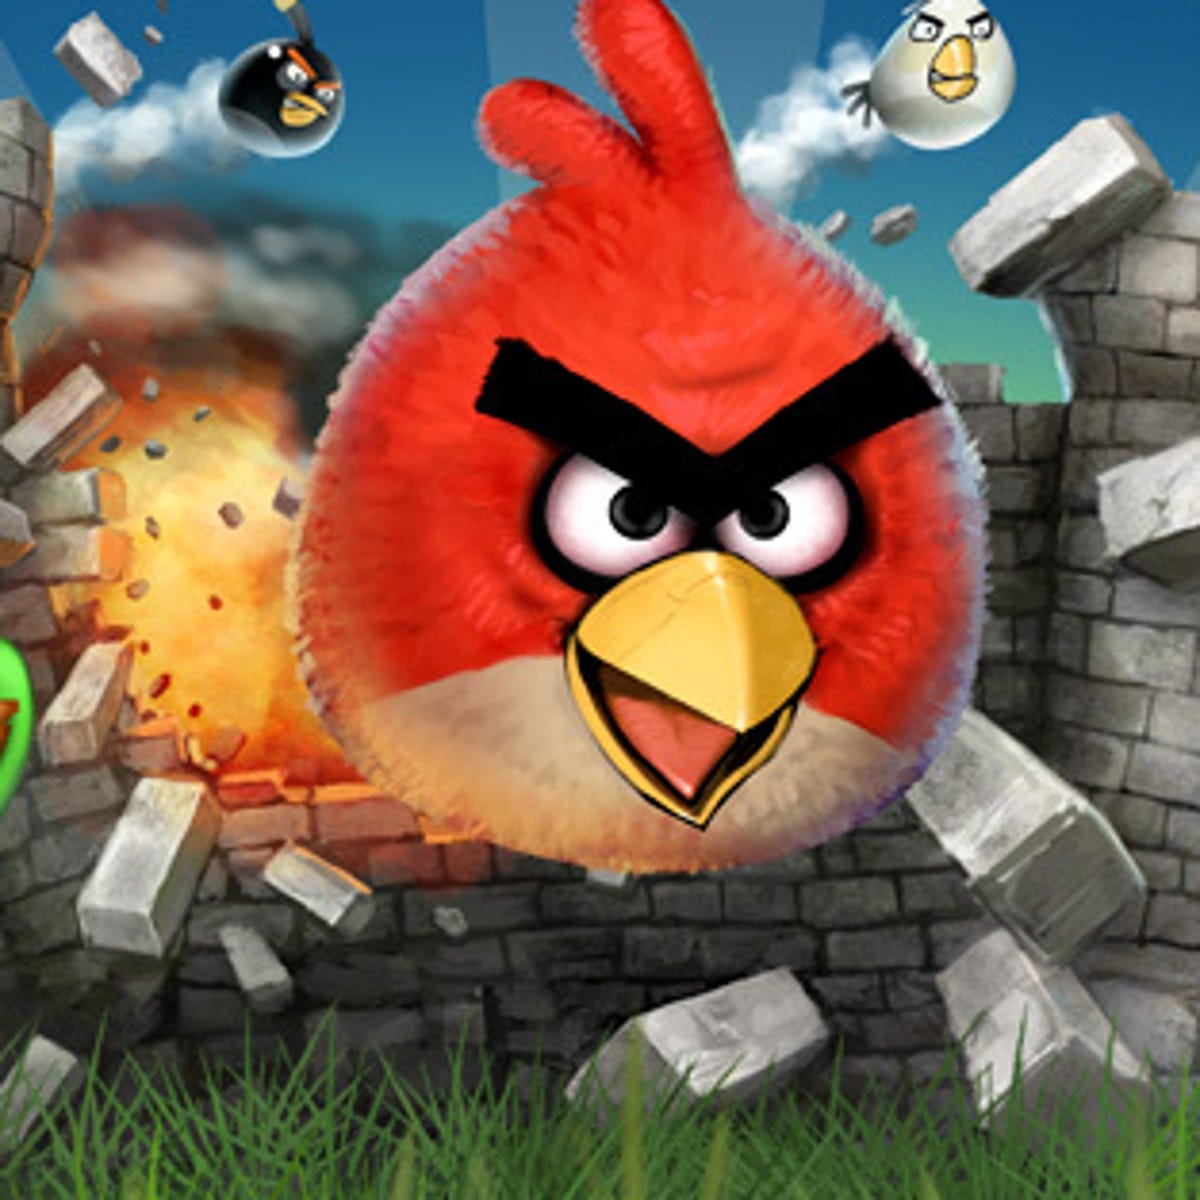 Angry Birds cartoon to fly onto games and TV this weekend - CNET